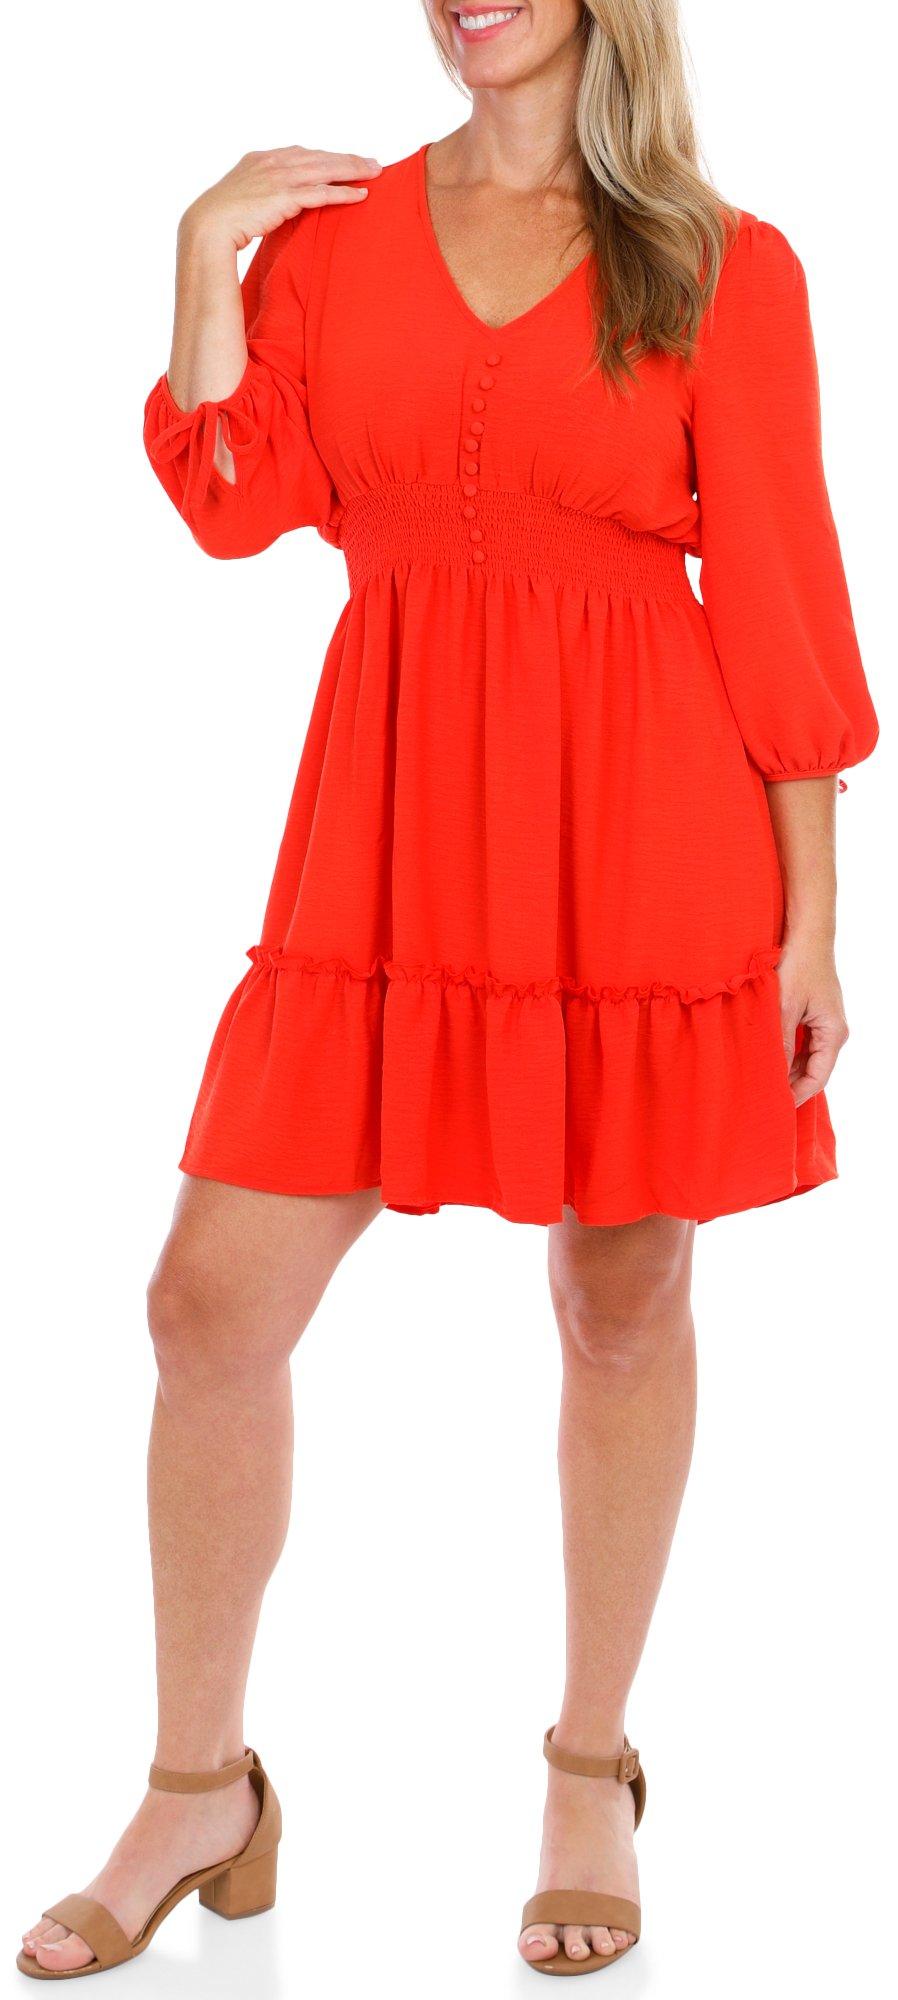 Women's Solid Smock and Ruffle Dress